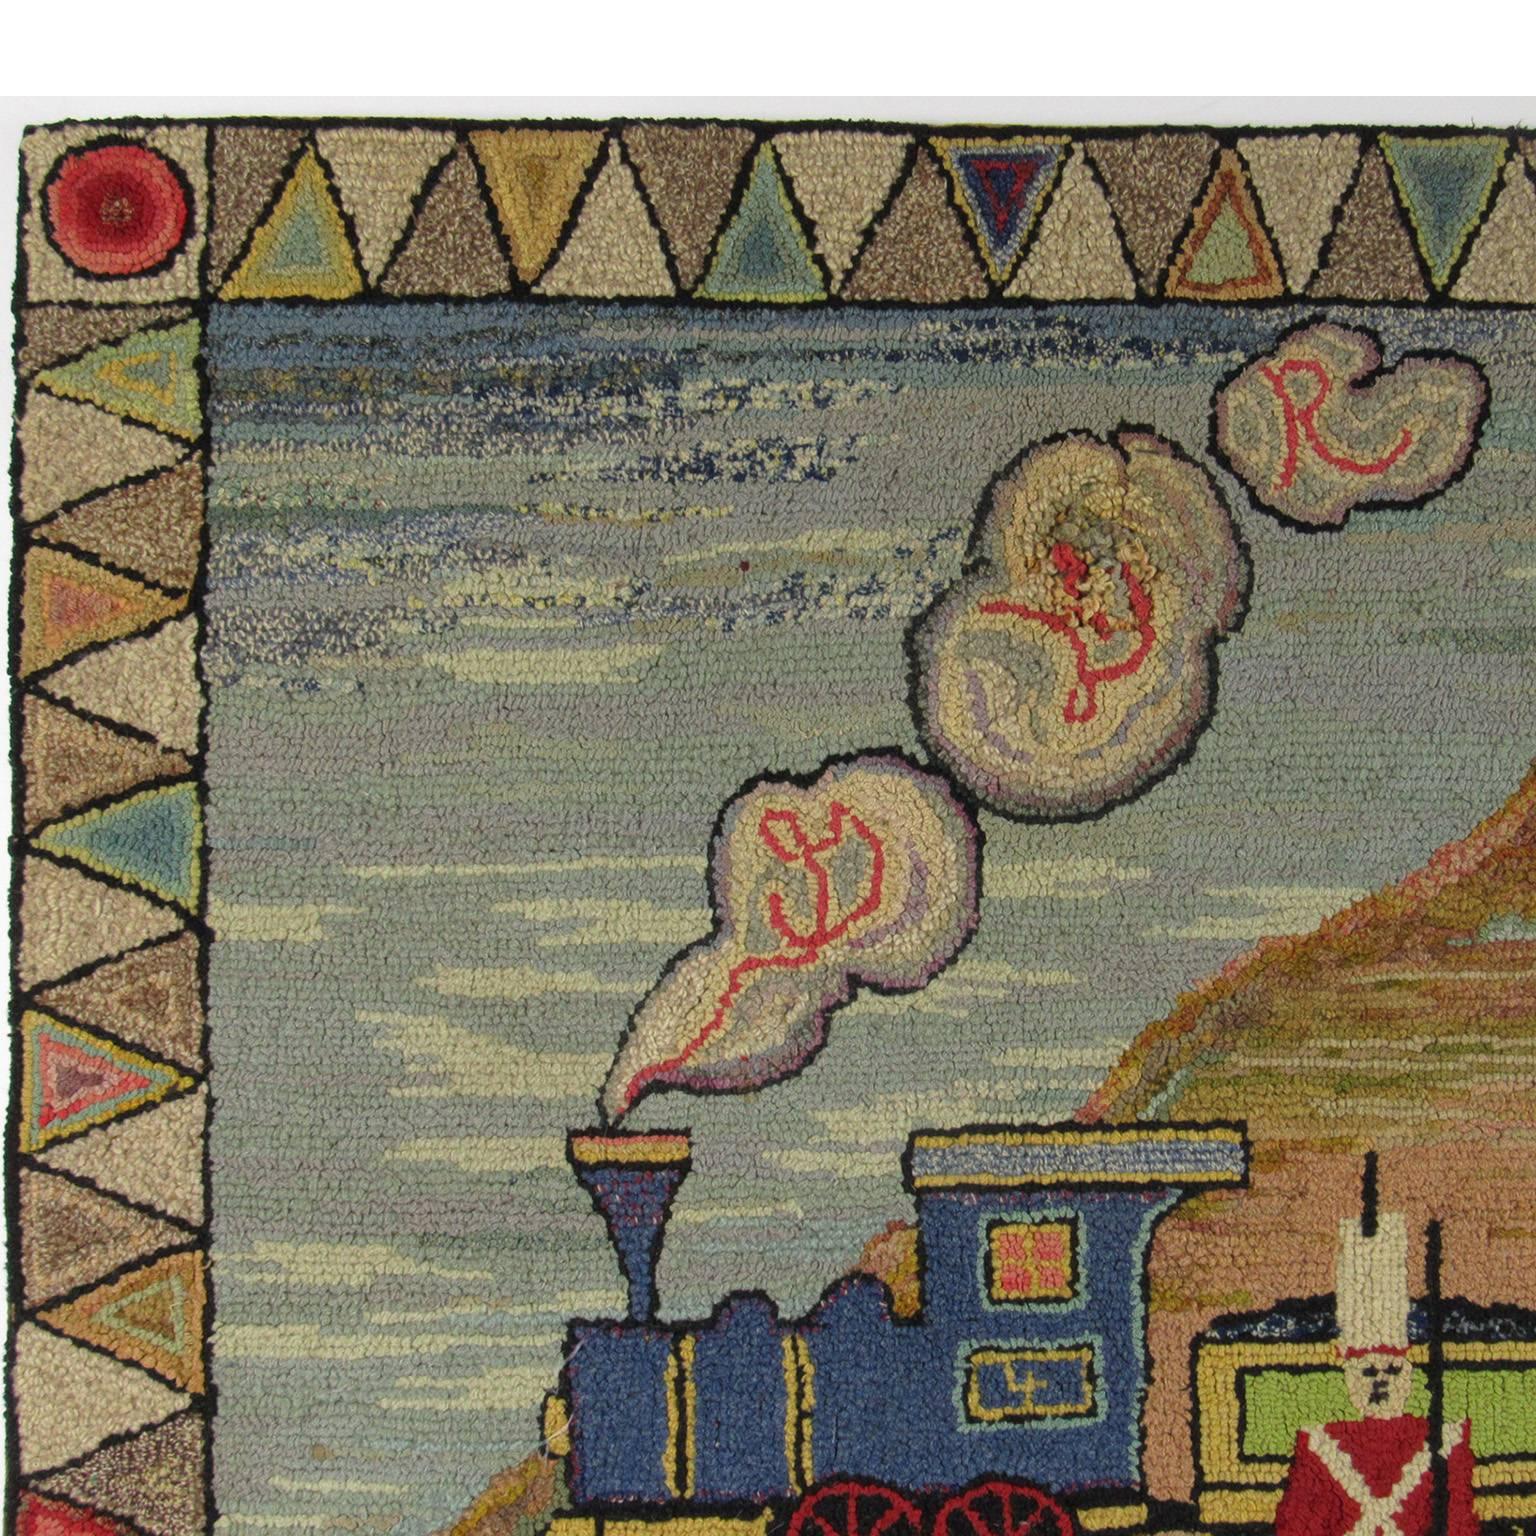 American Folk Art "Animal Train" Hooked Rug, late 19th/early 20th century.  A whimsical rug perfect for a child's room or nursery, depicting a toy soldier standing in front of a train pulling cars filled with exotic animals through a